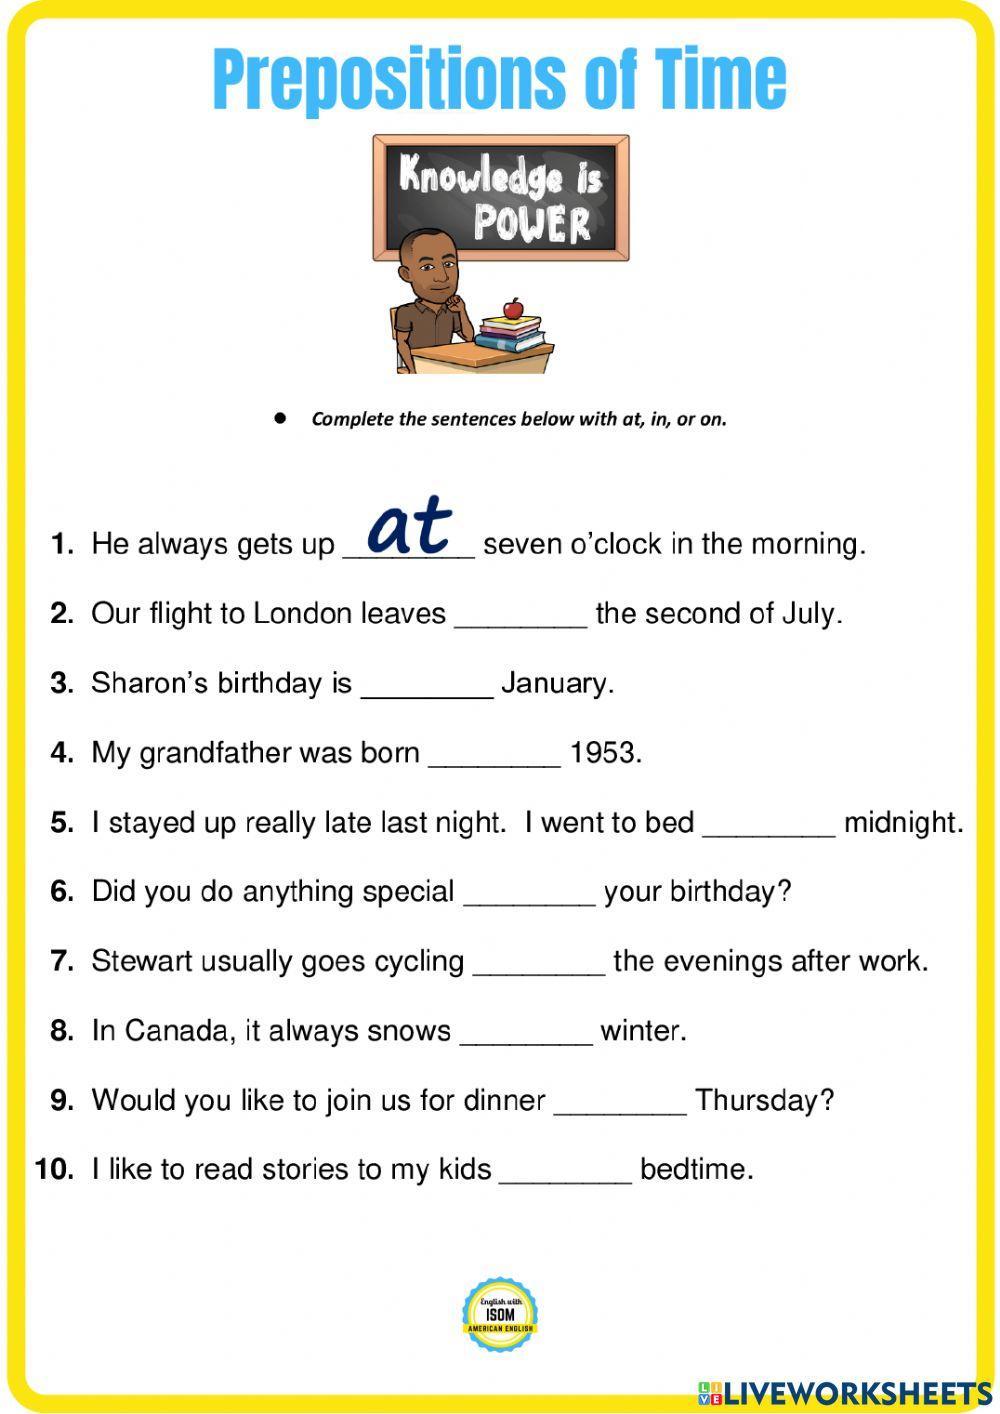 PREPOSITIONS OF TIME at, on, in